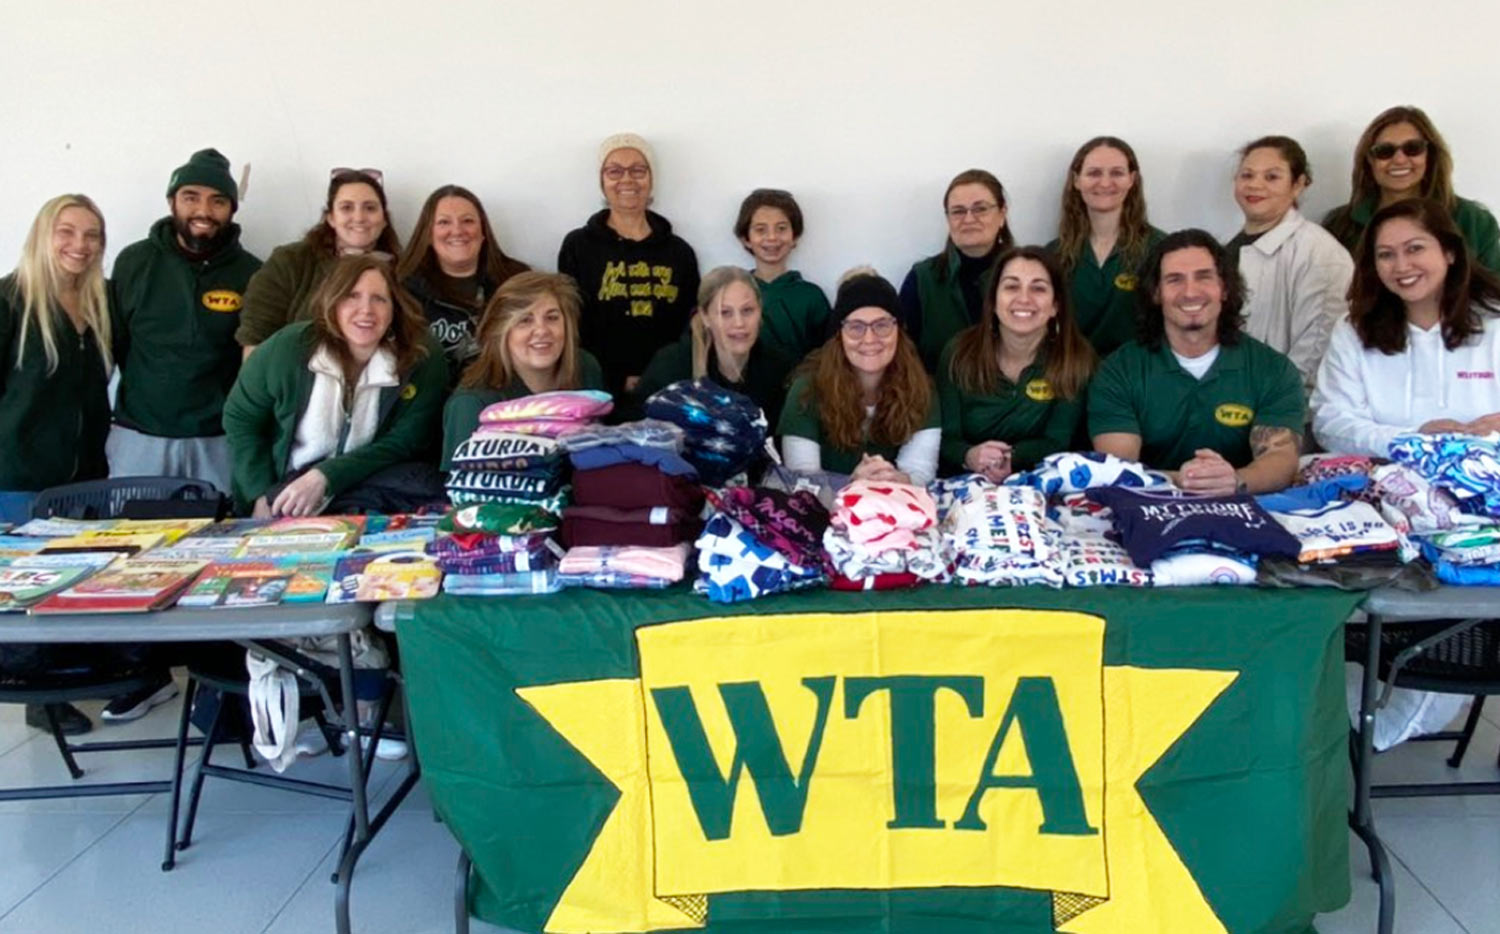 members of the Westbury Teachers Association gather for a group photo at the associations table during a pajama drive